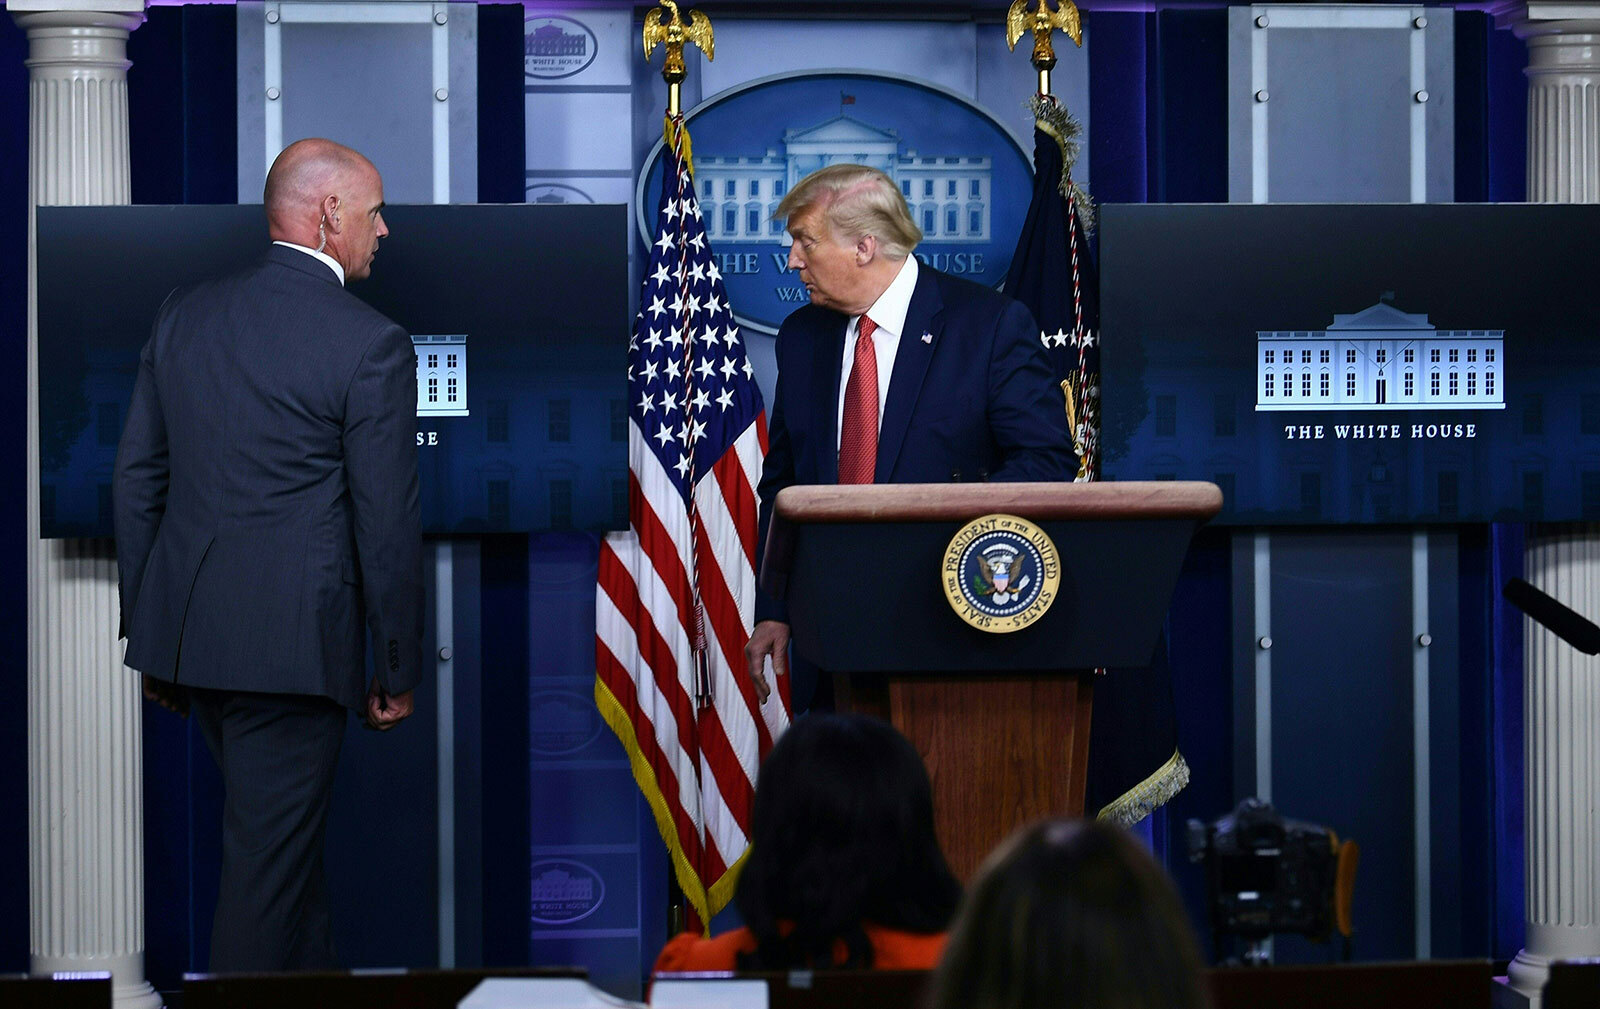 President Donald Trump is being removed from the Brady Briefing Room of the White House in Washington on Monday, August 10.